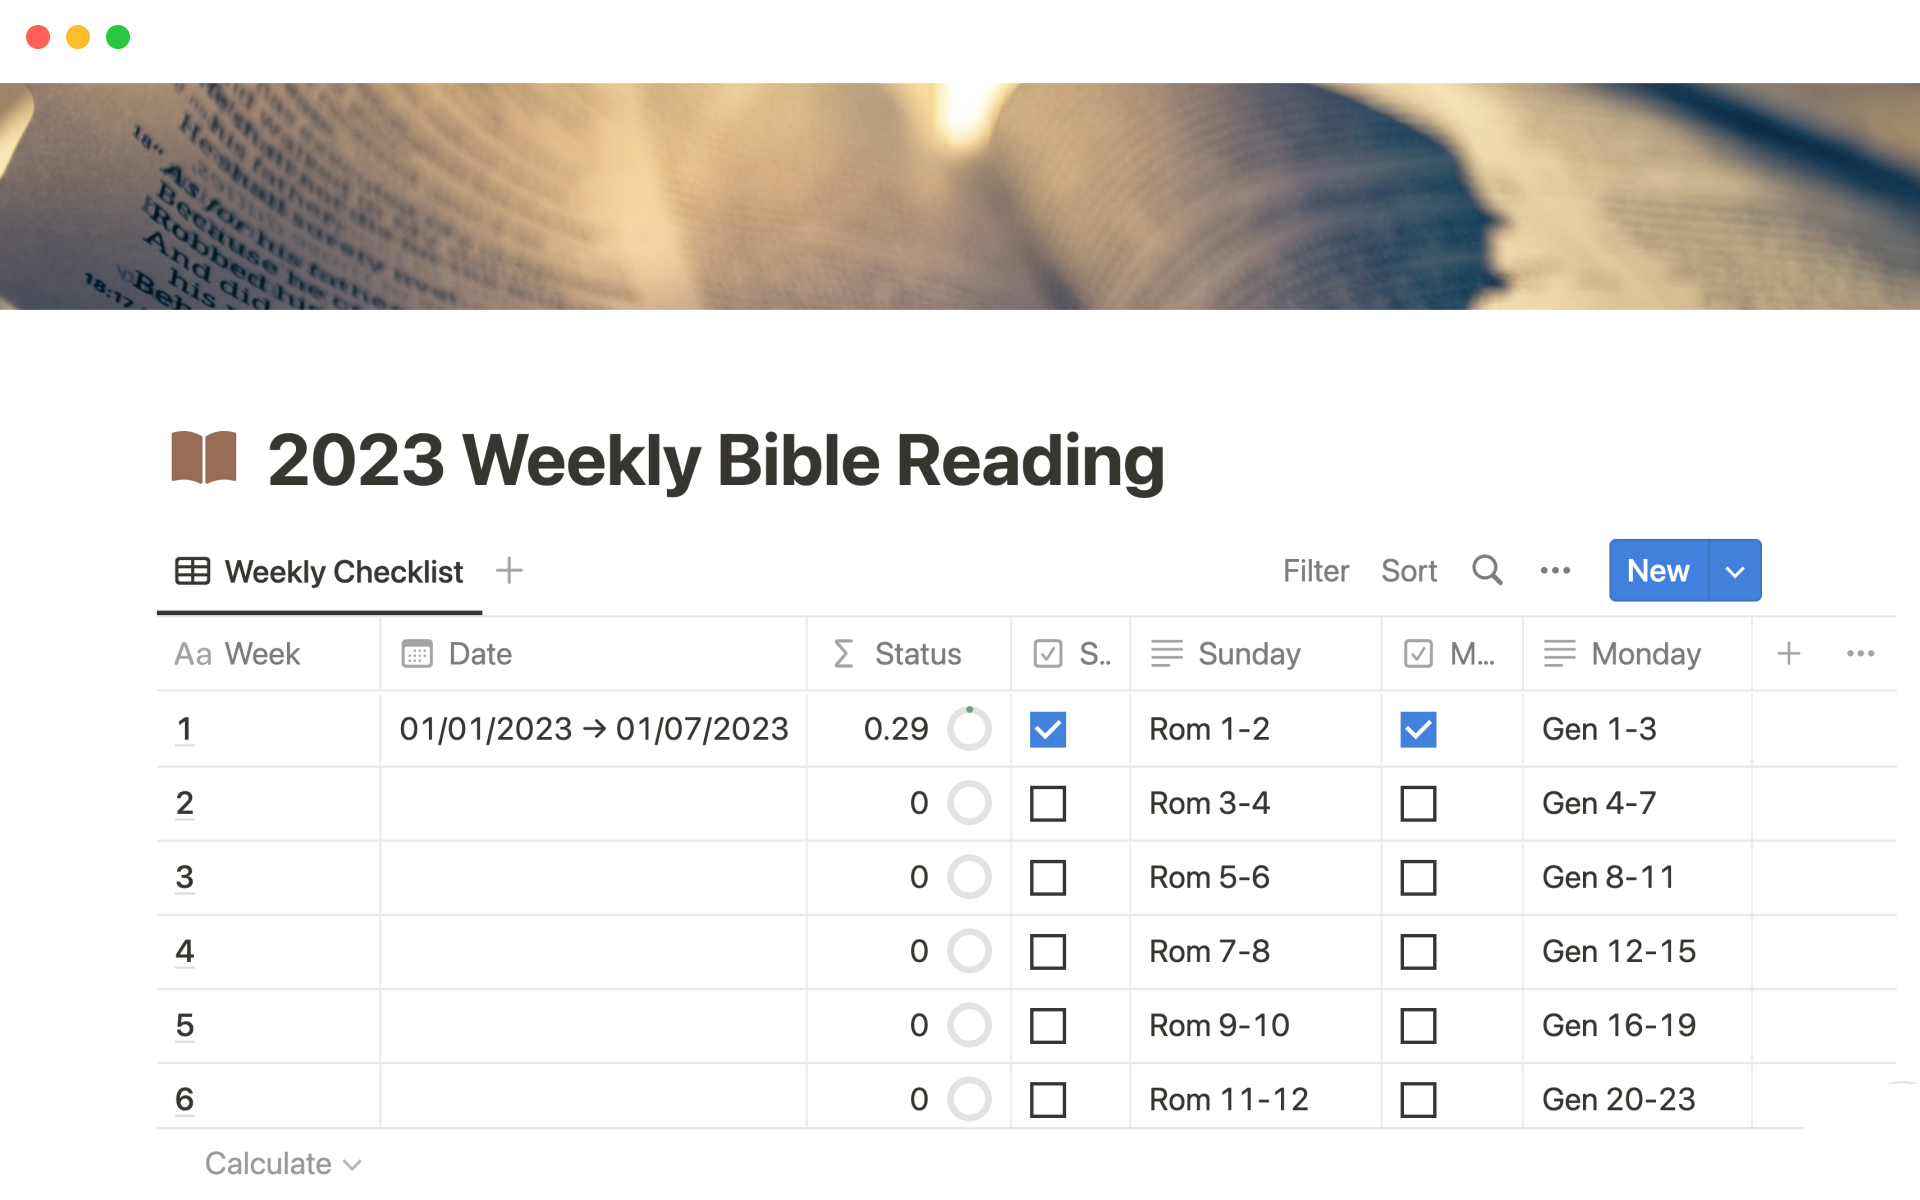 Read through the Bible in 52 weeks, starting any week of the year.